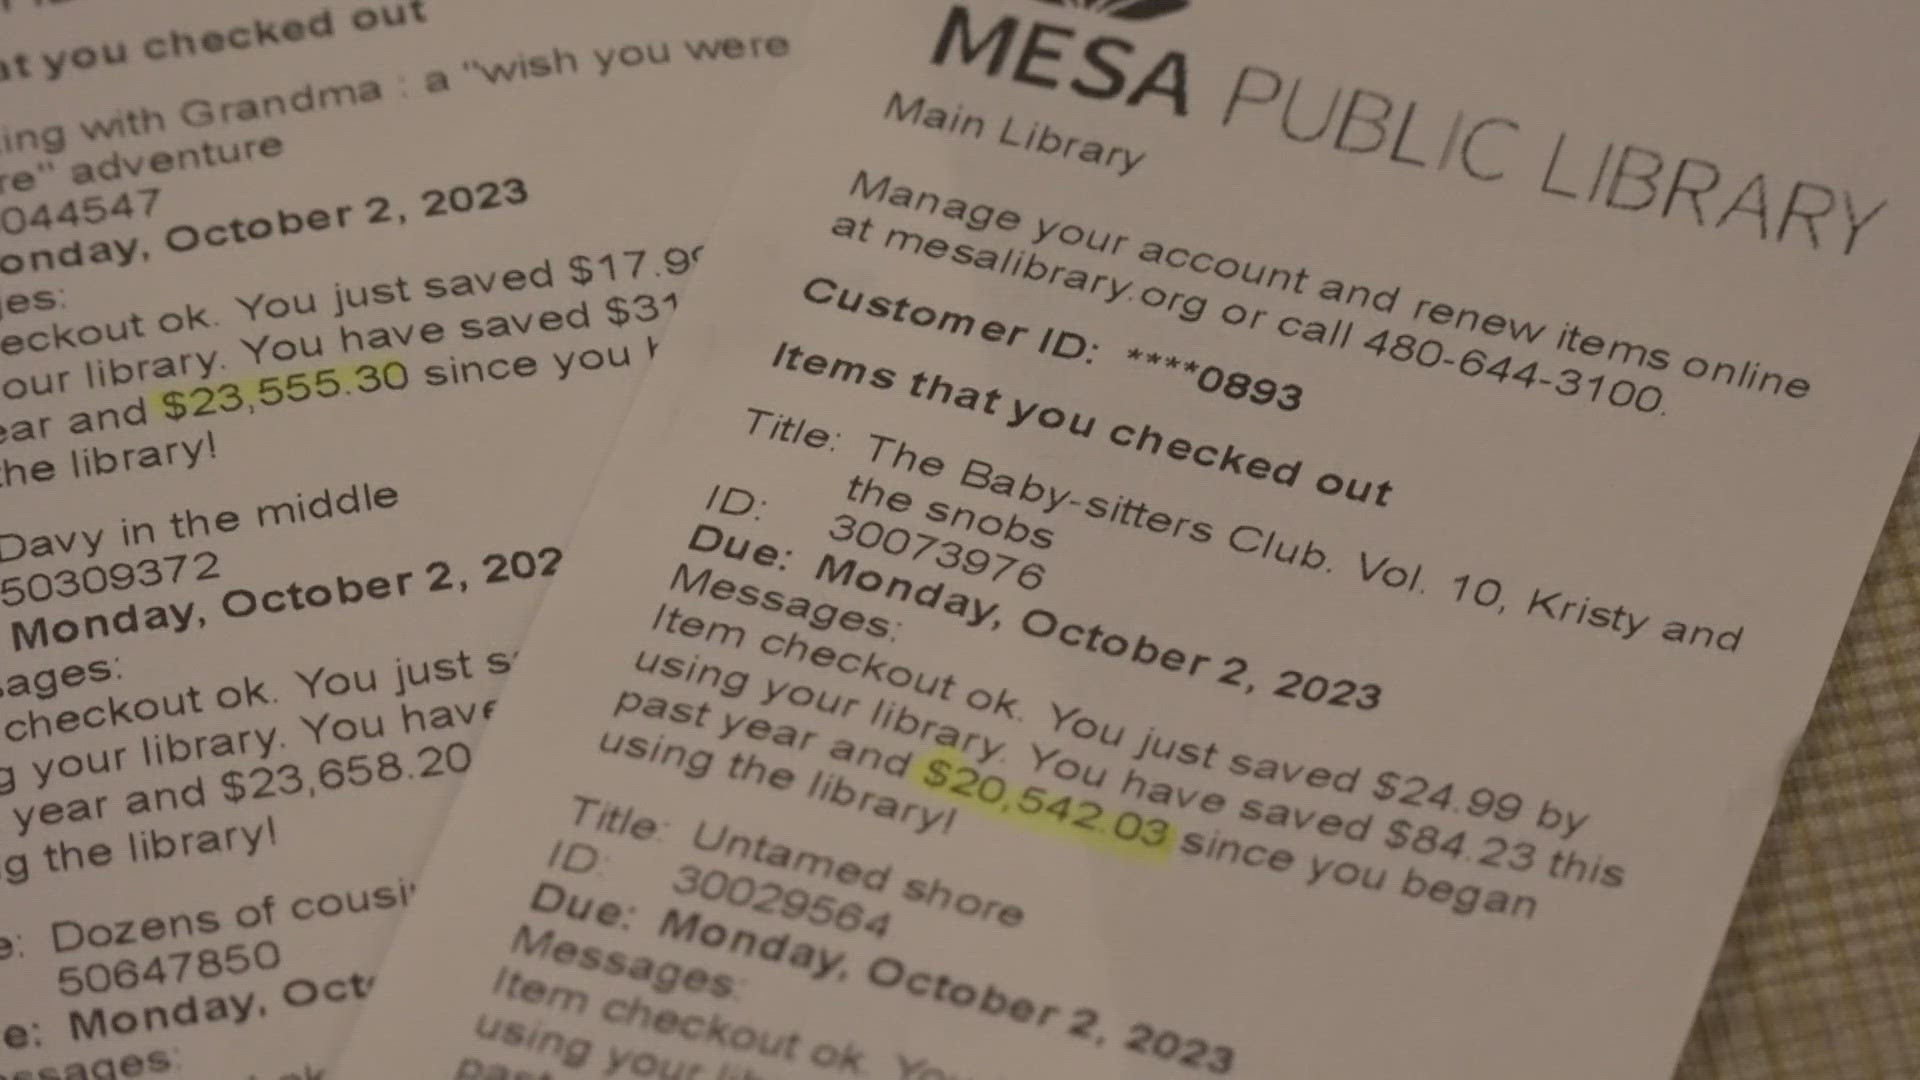 Mesa woman saved $65,550 by borrowing books from public library instead of purchasing.